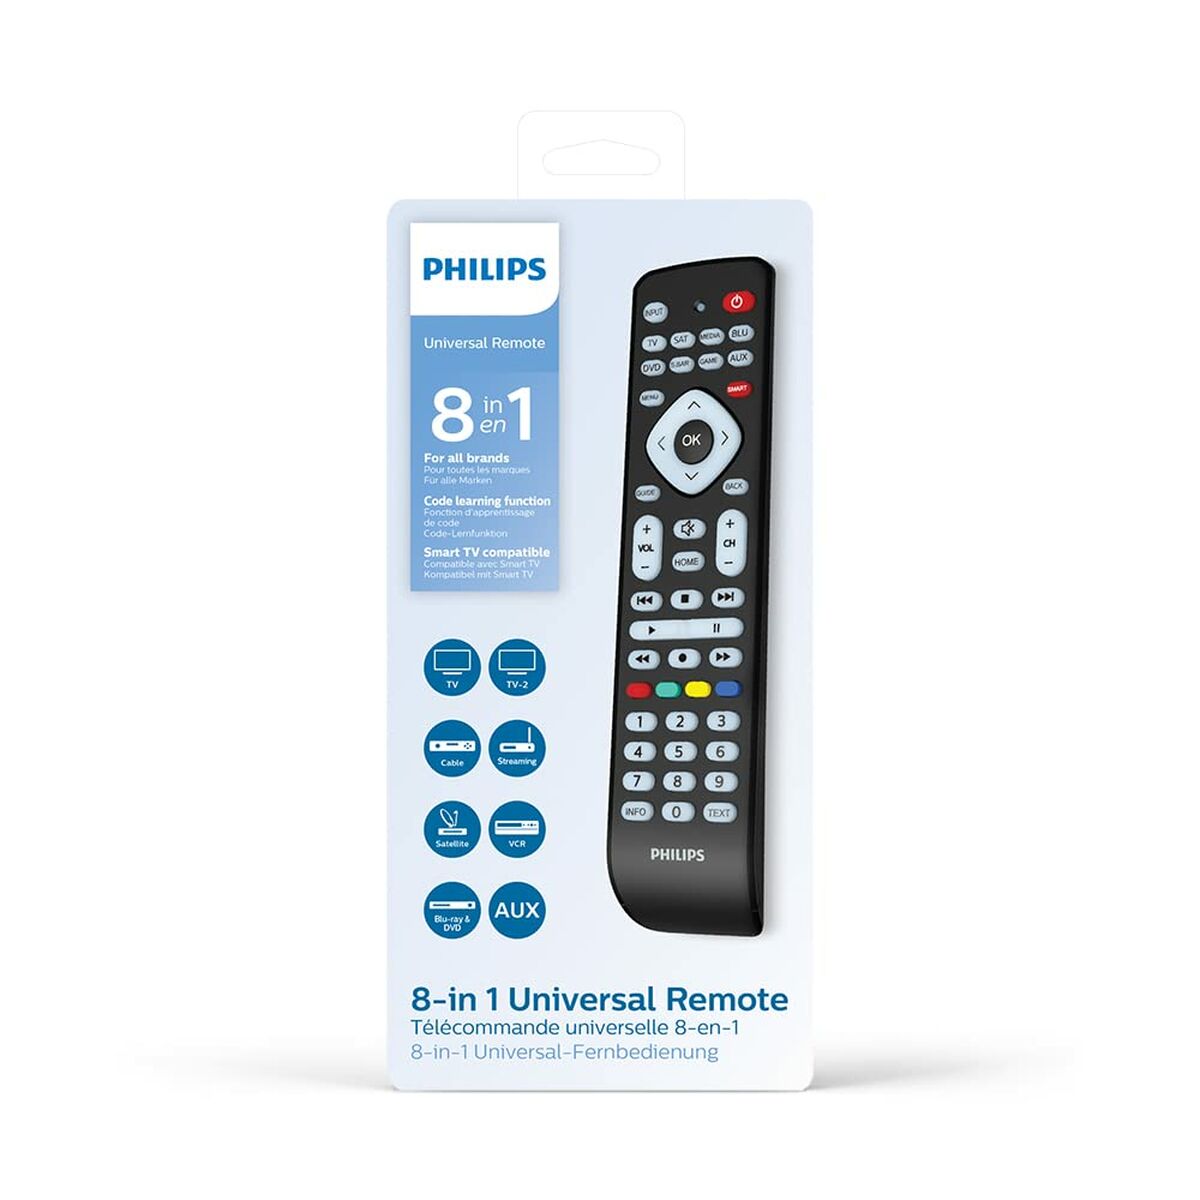 Remote control Philips SRP2018/10, Philips, Electronics, TV, Video and home cinema, remote-control-philips-srp2018-10, Brand_Philips, category-reference-2609, category-reference-2642, category-reference-2852, category-reference-t-18805, category-reference-t-19653, category-reference-t-19921, category-reference-t-21391, cinema and television, computers / peripherals, Condition_NEW, entertainment, office, Price_20 - 50, RiotNook